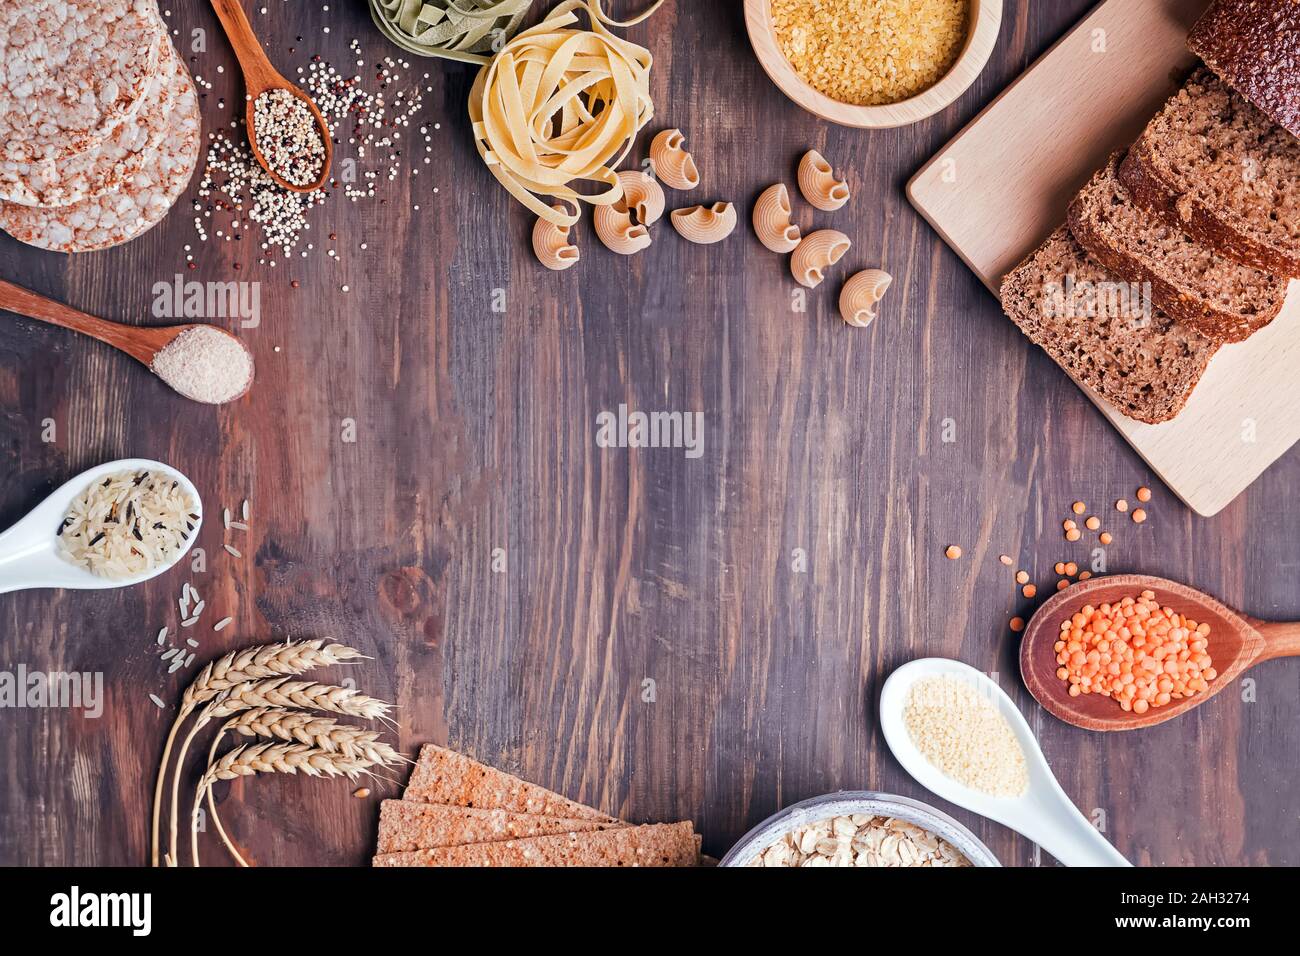 Carbohydrate food Images - Search Images on Everypixel